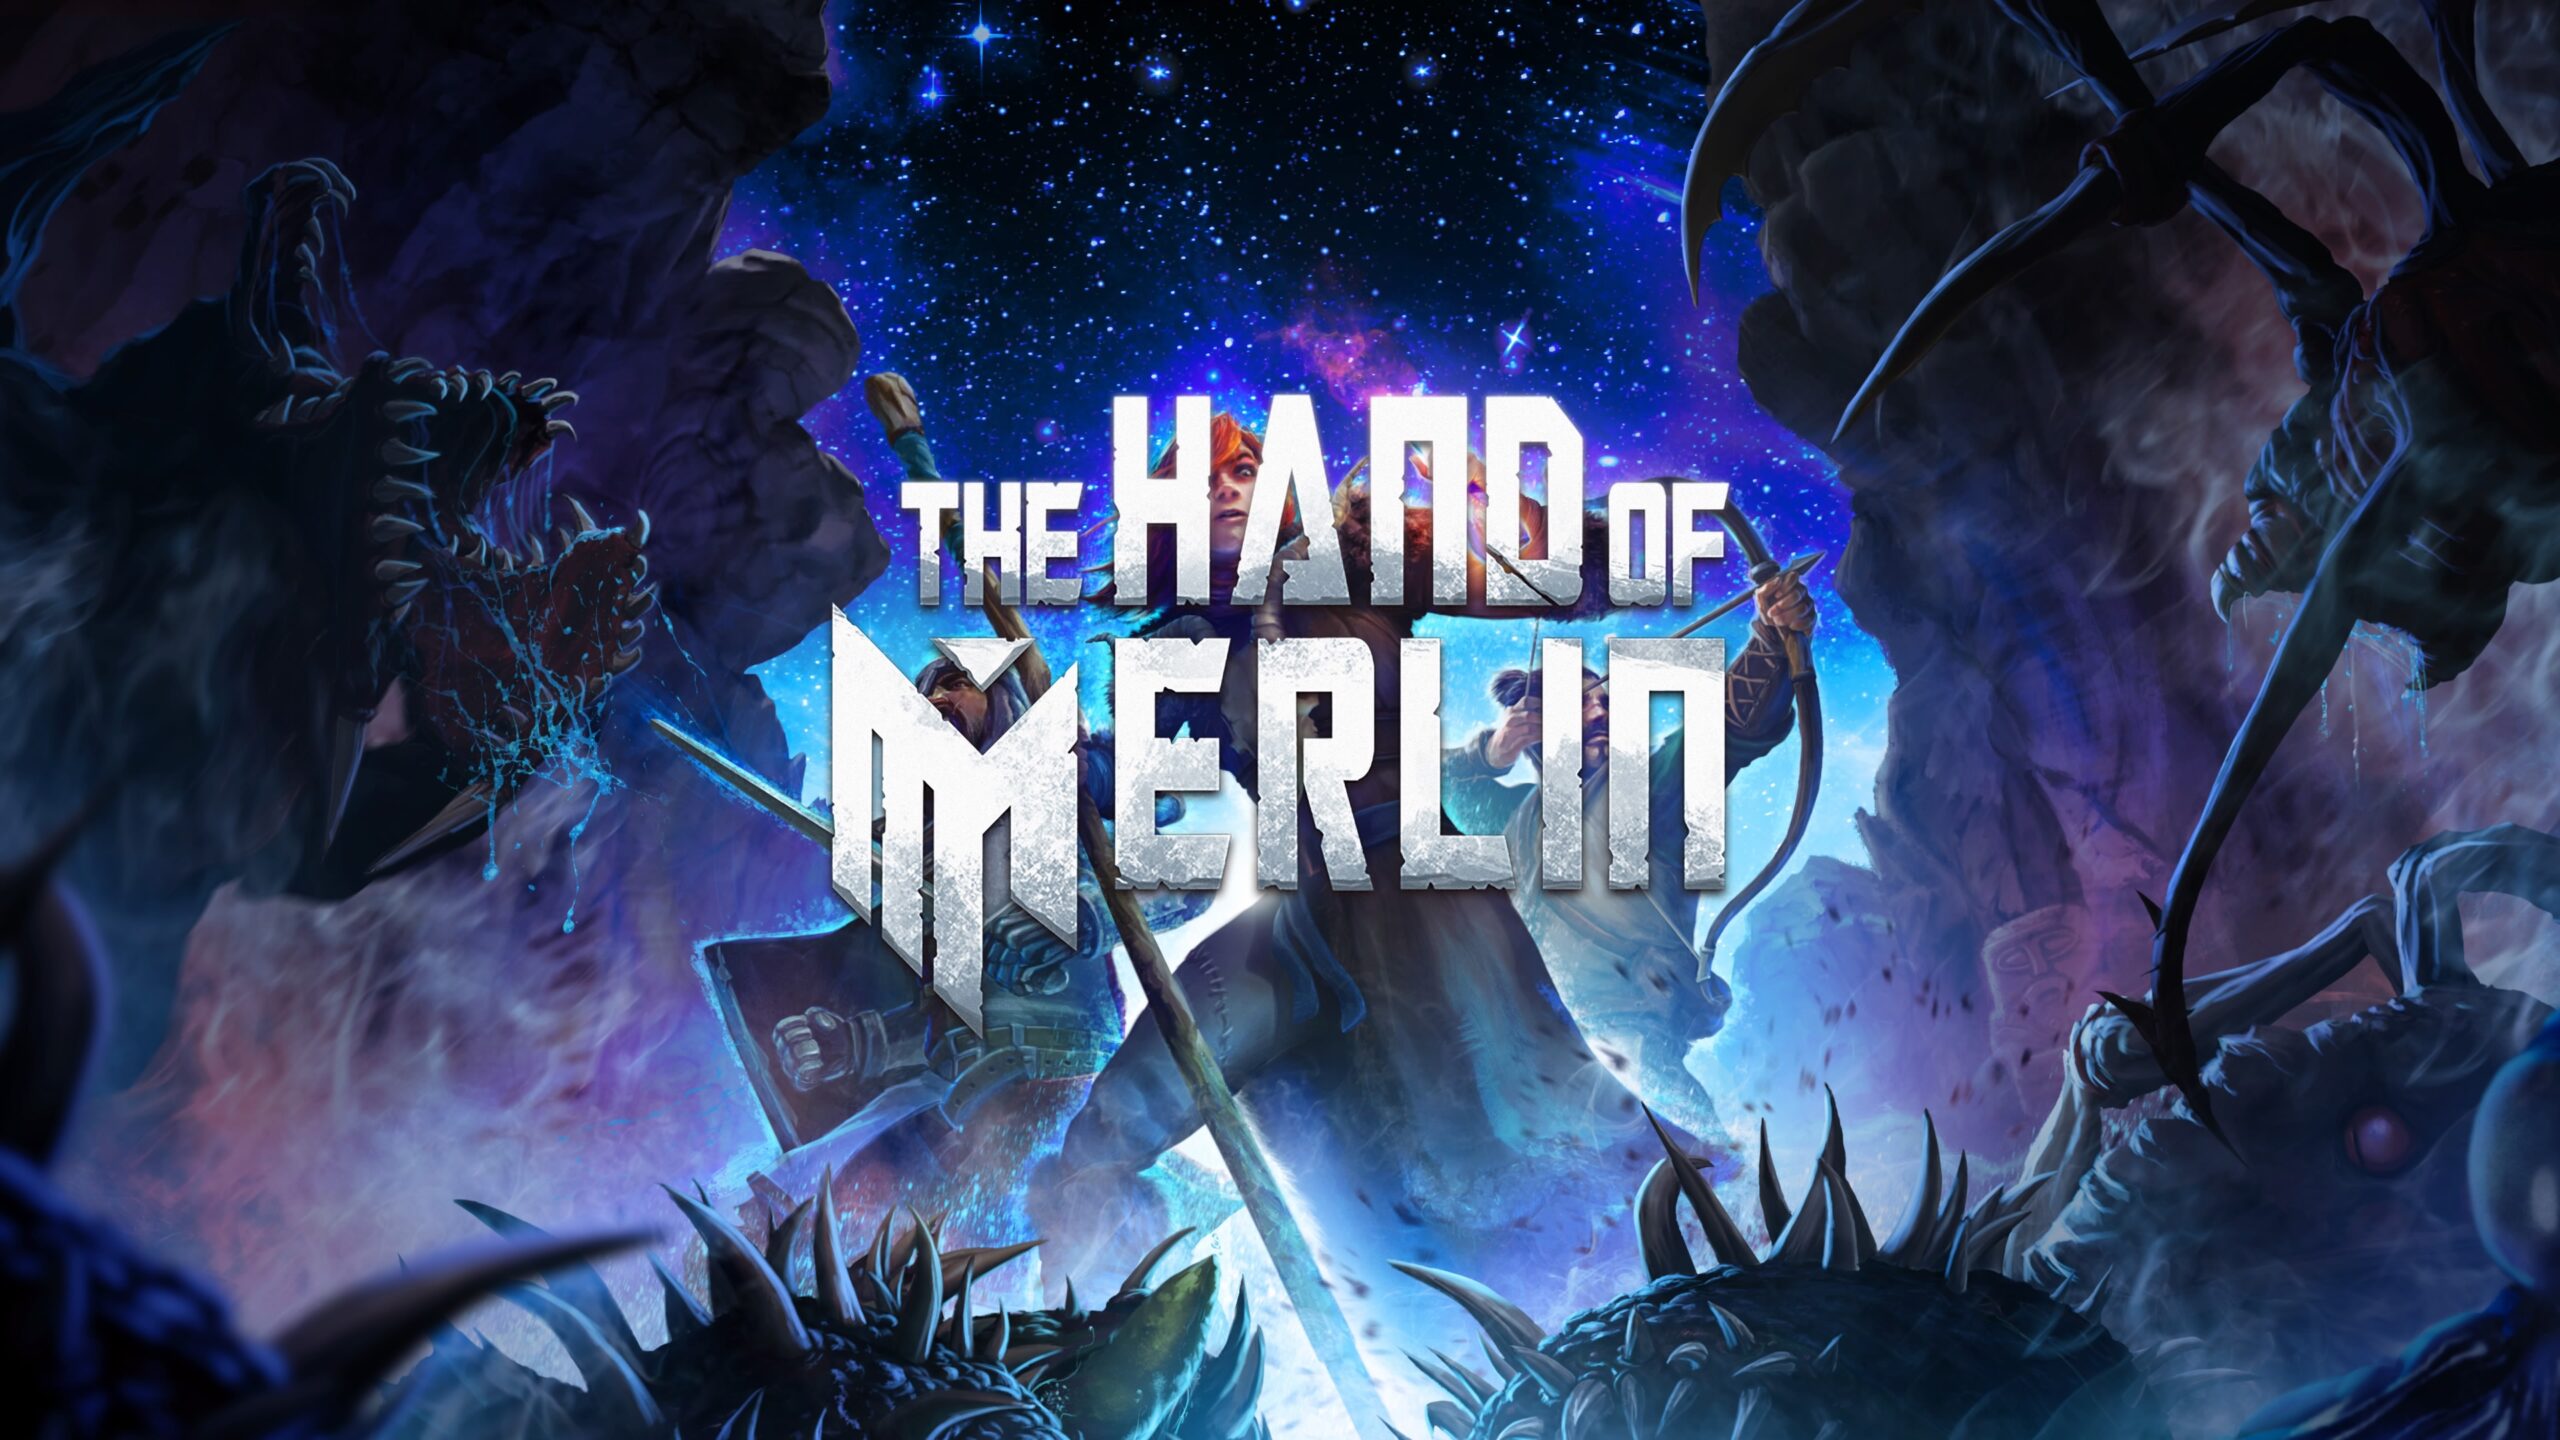 The Hand of Merlin download the new for android